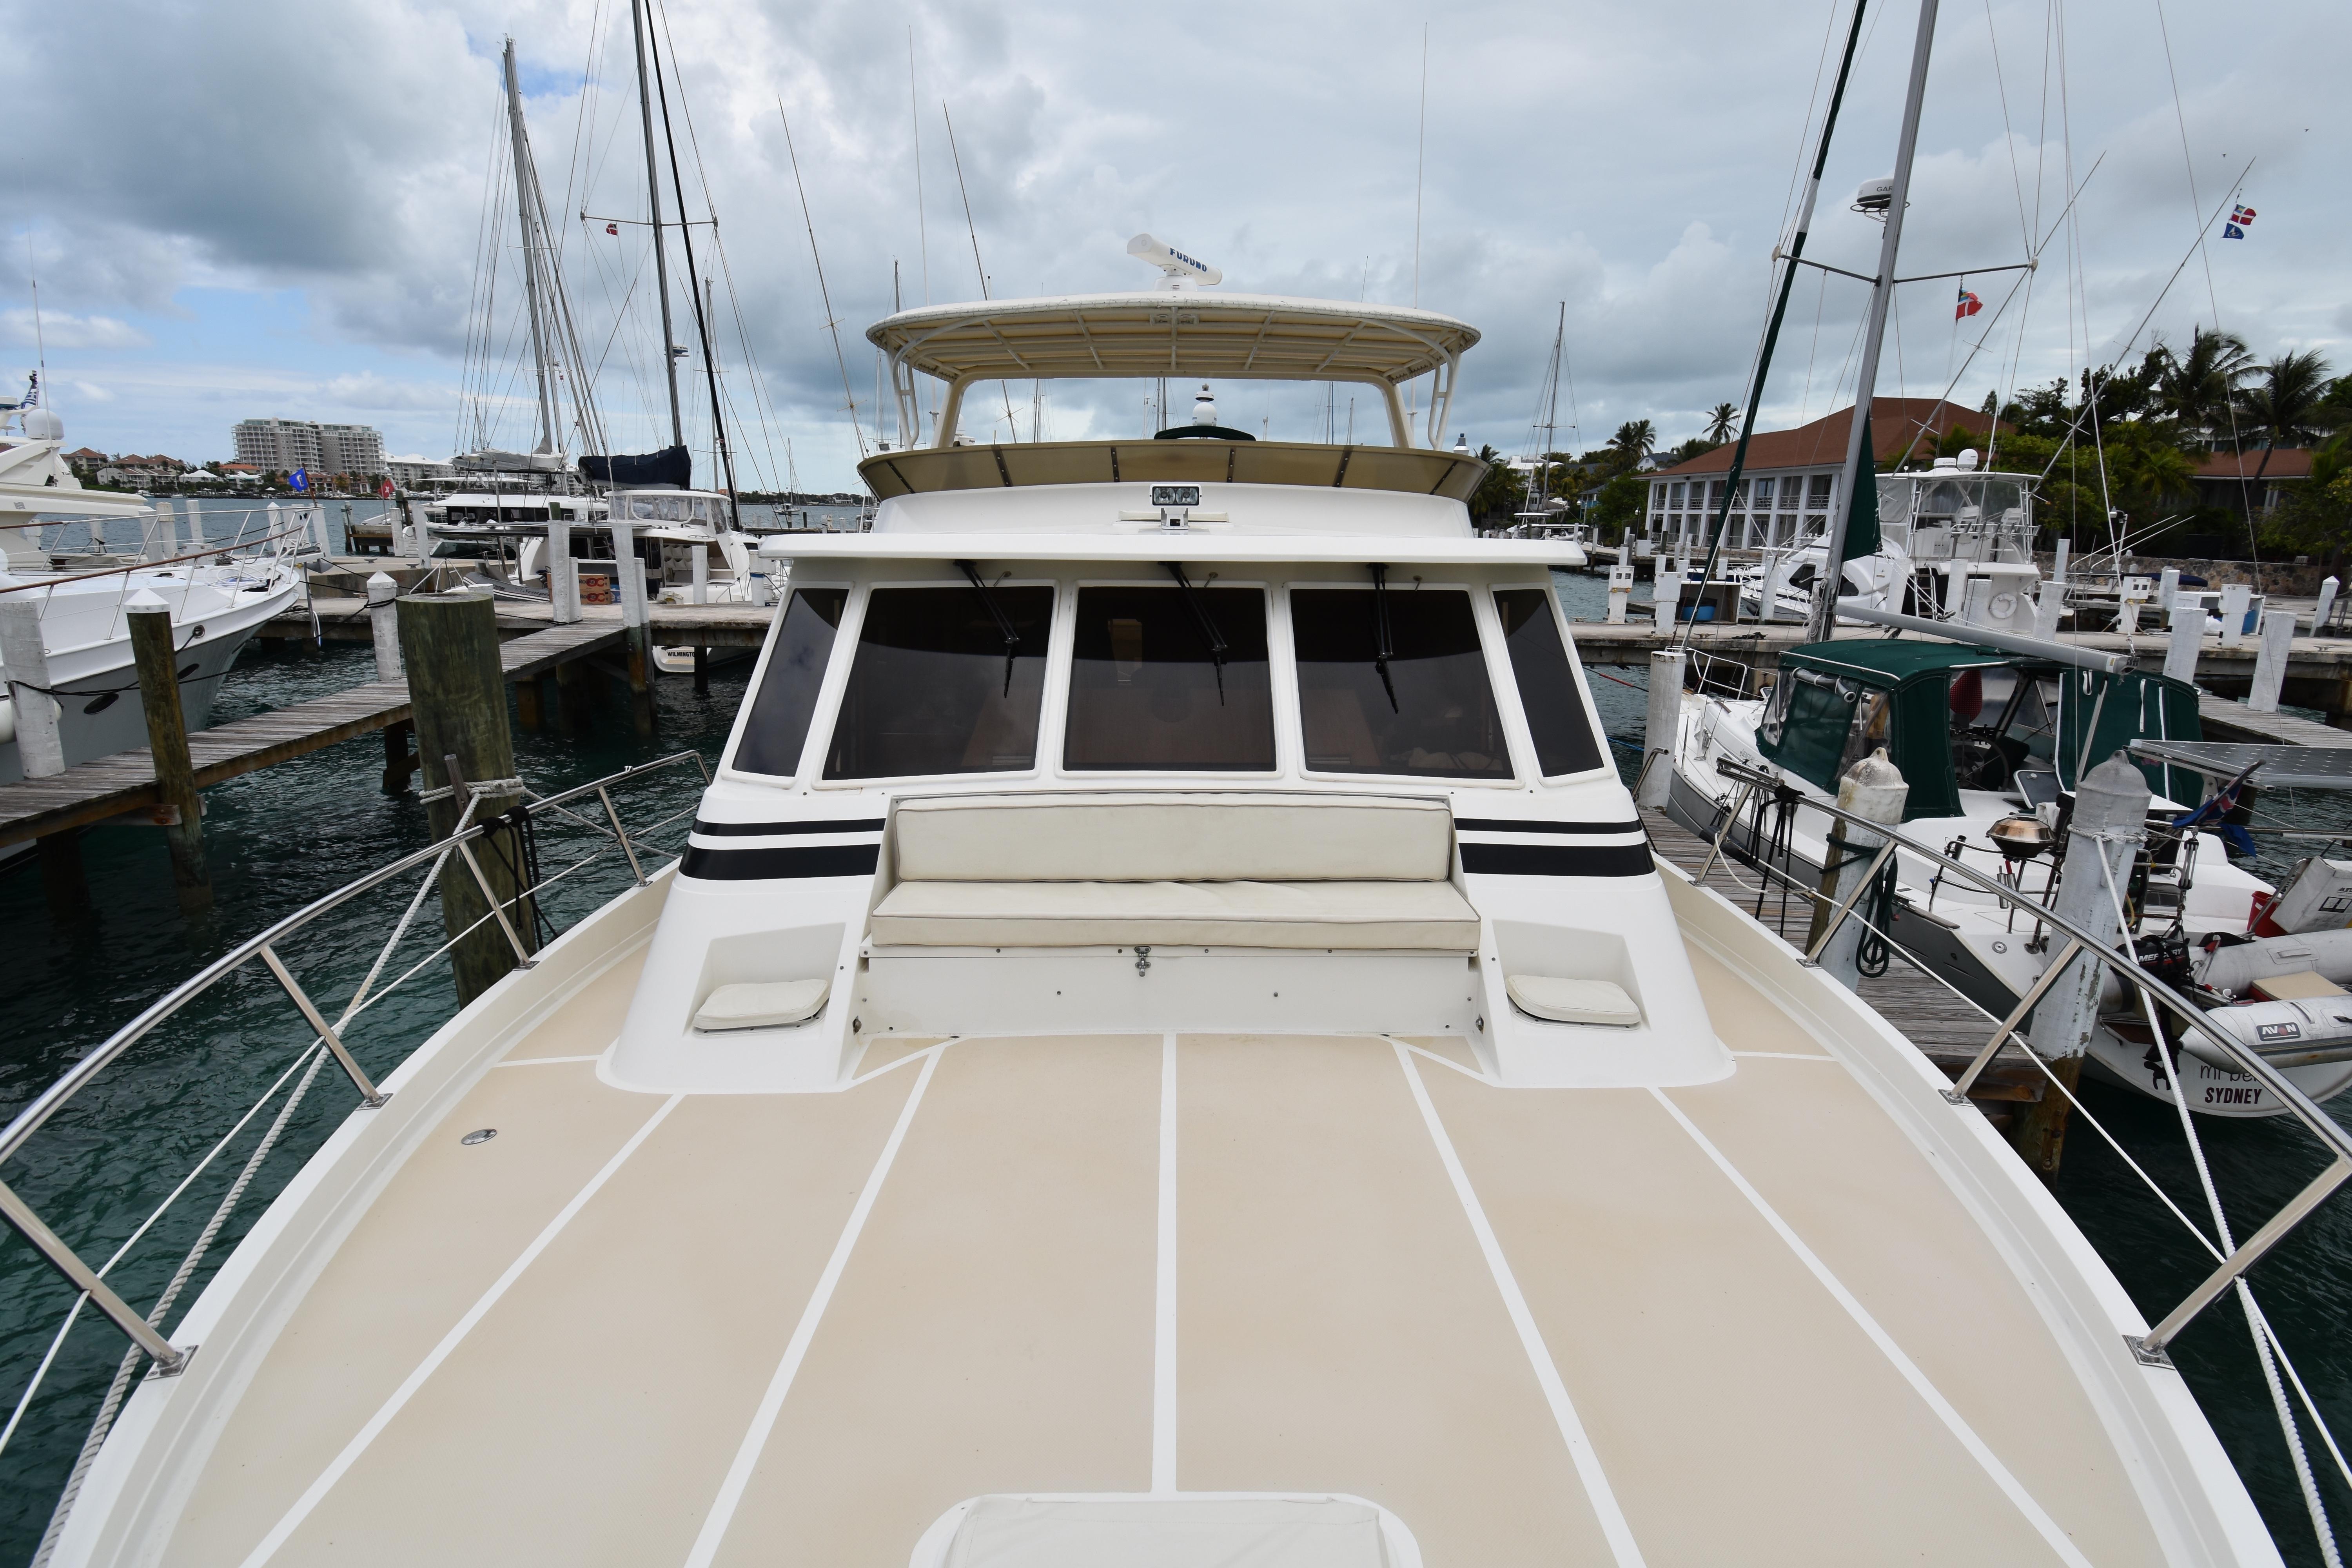 pilot house yachts for sale